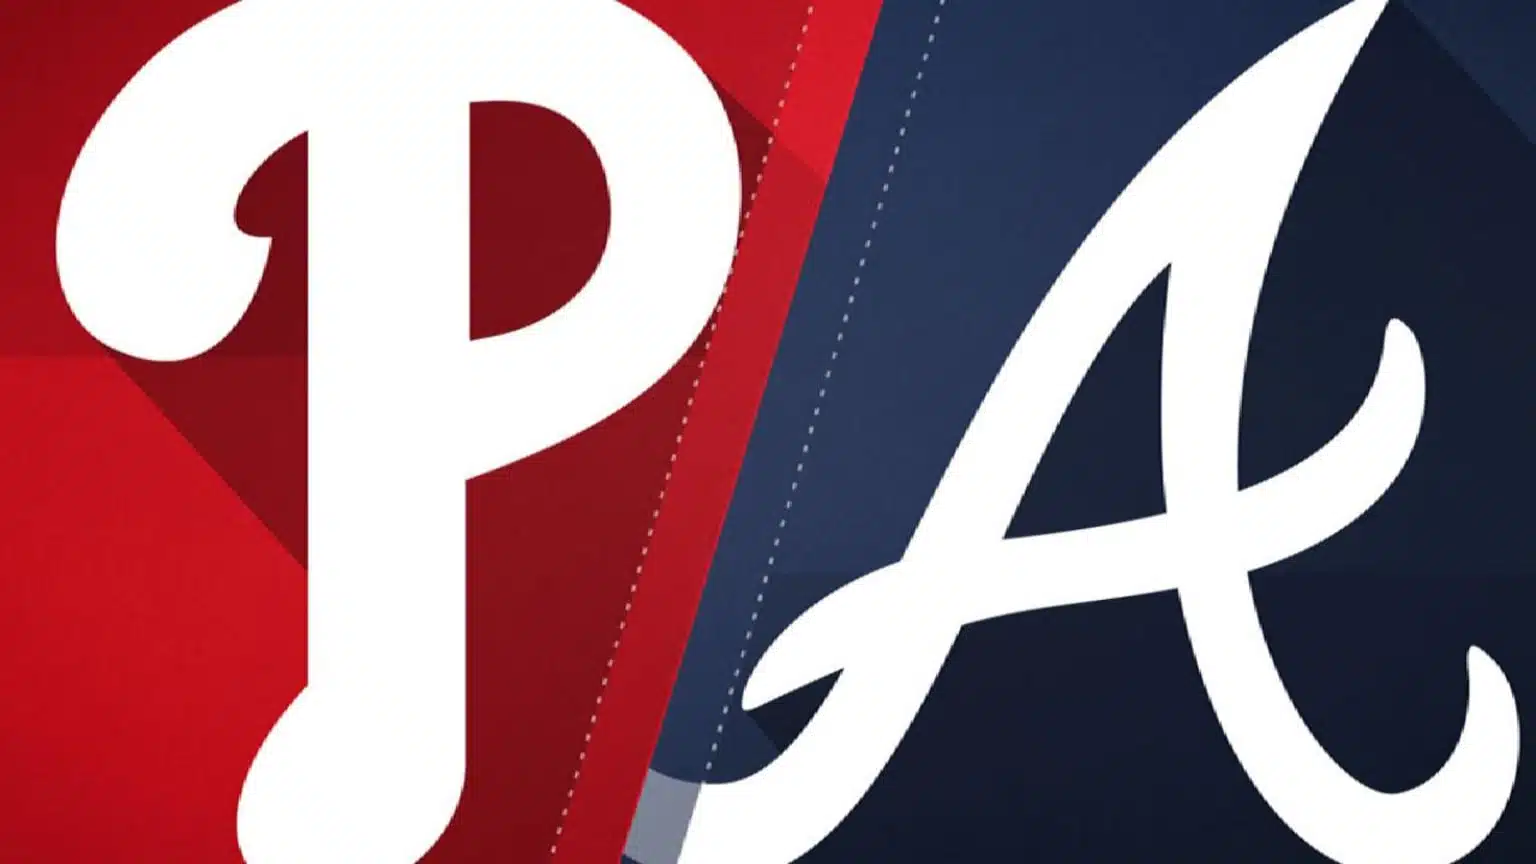 Phillies vs. Braves: Probable Pitchers, Team Leaders, and More!